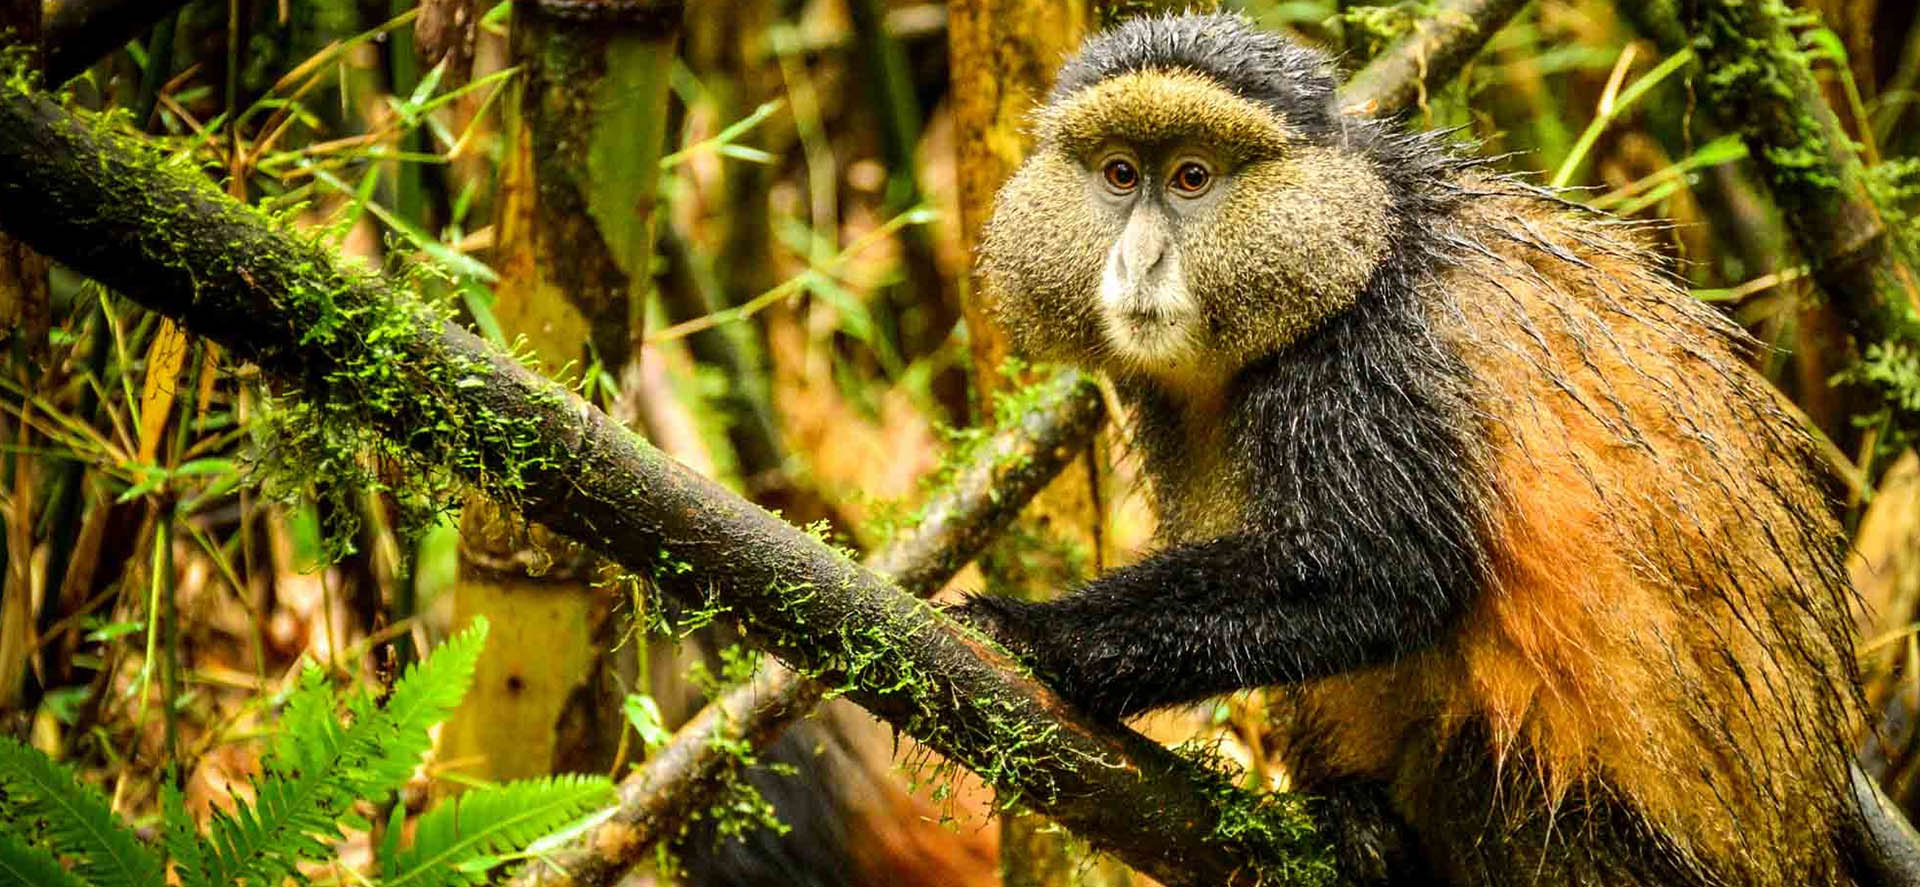 Facts About Golden Monkeys